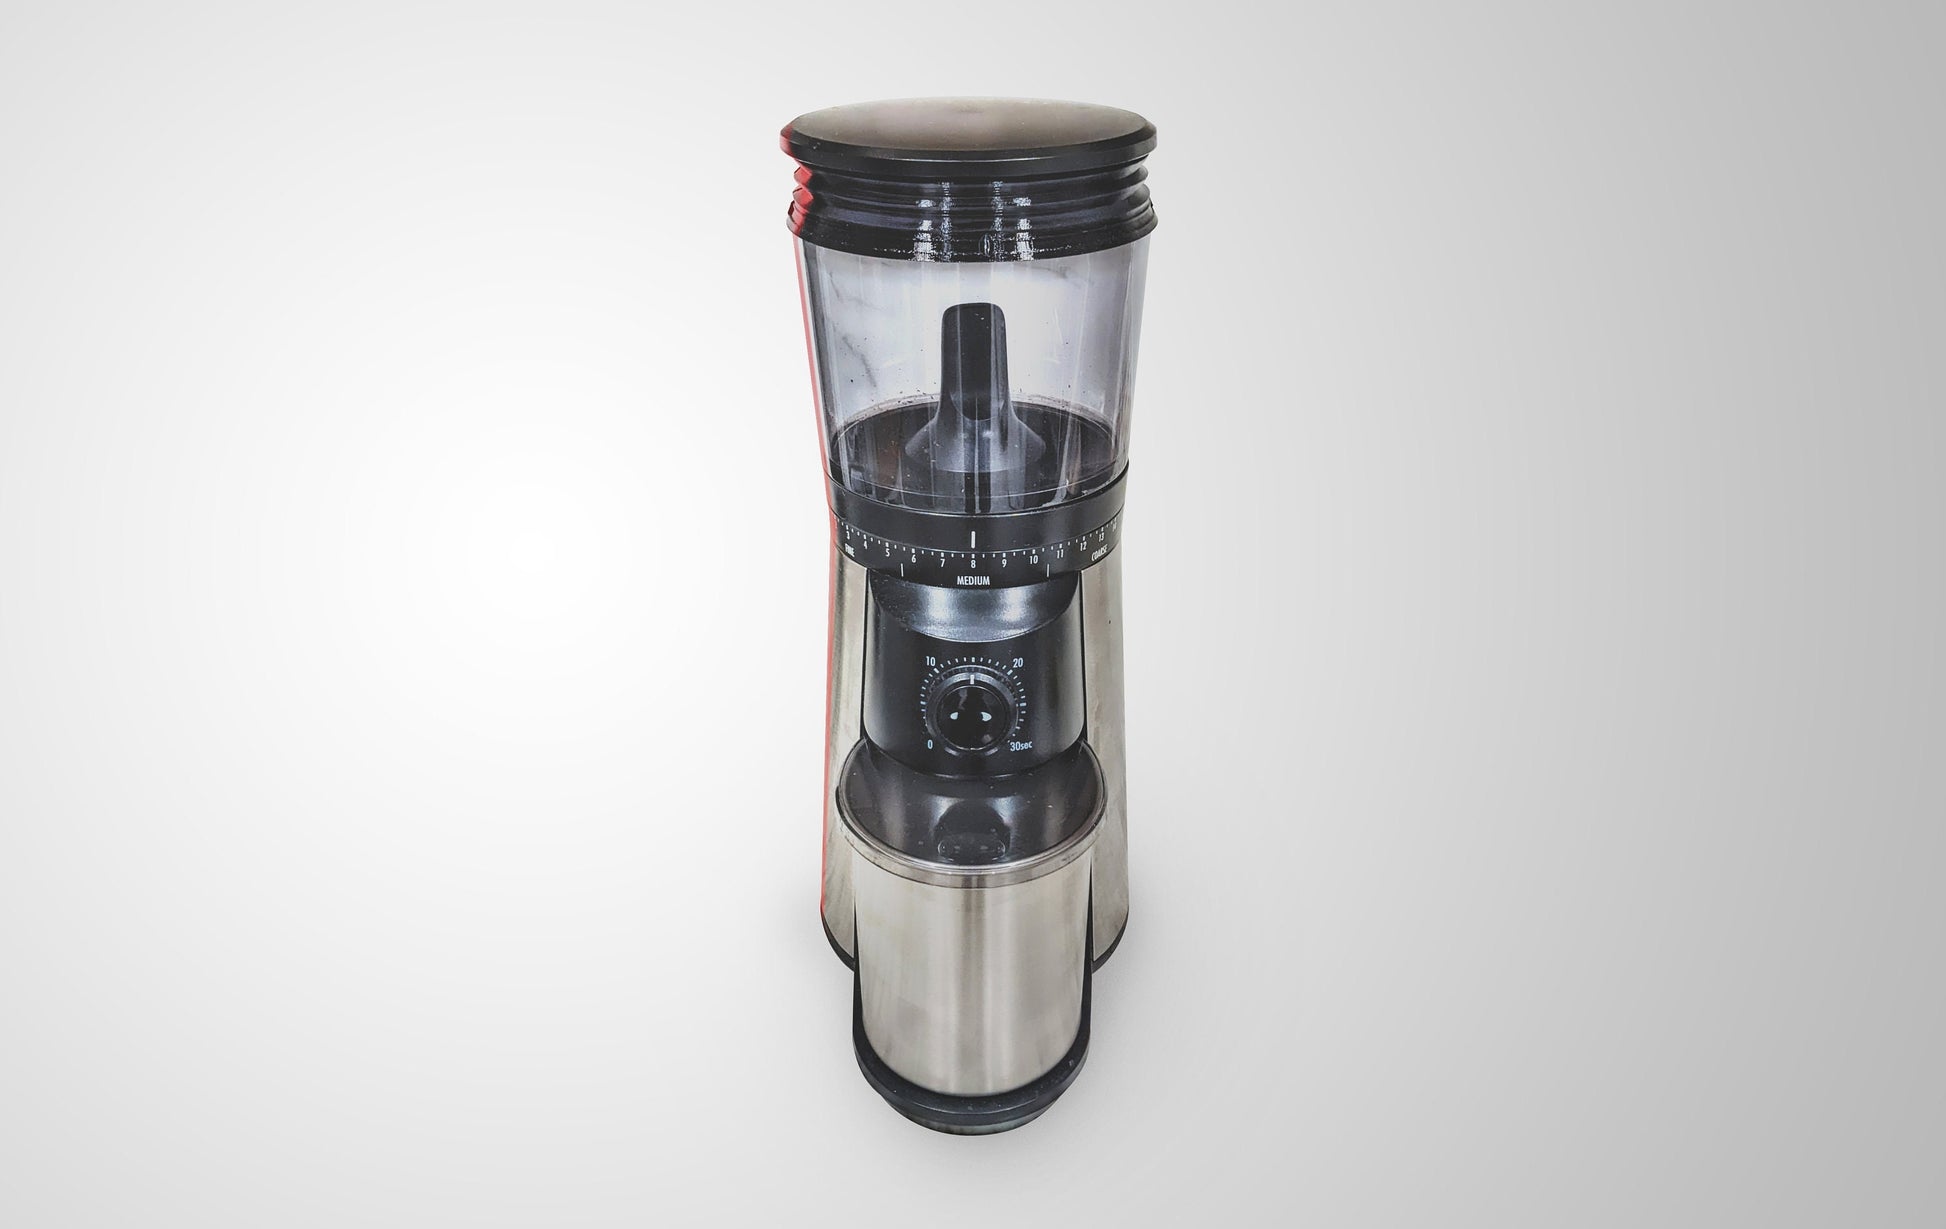 OXO On Barista Brain Conical Burr Coffee Grinder